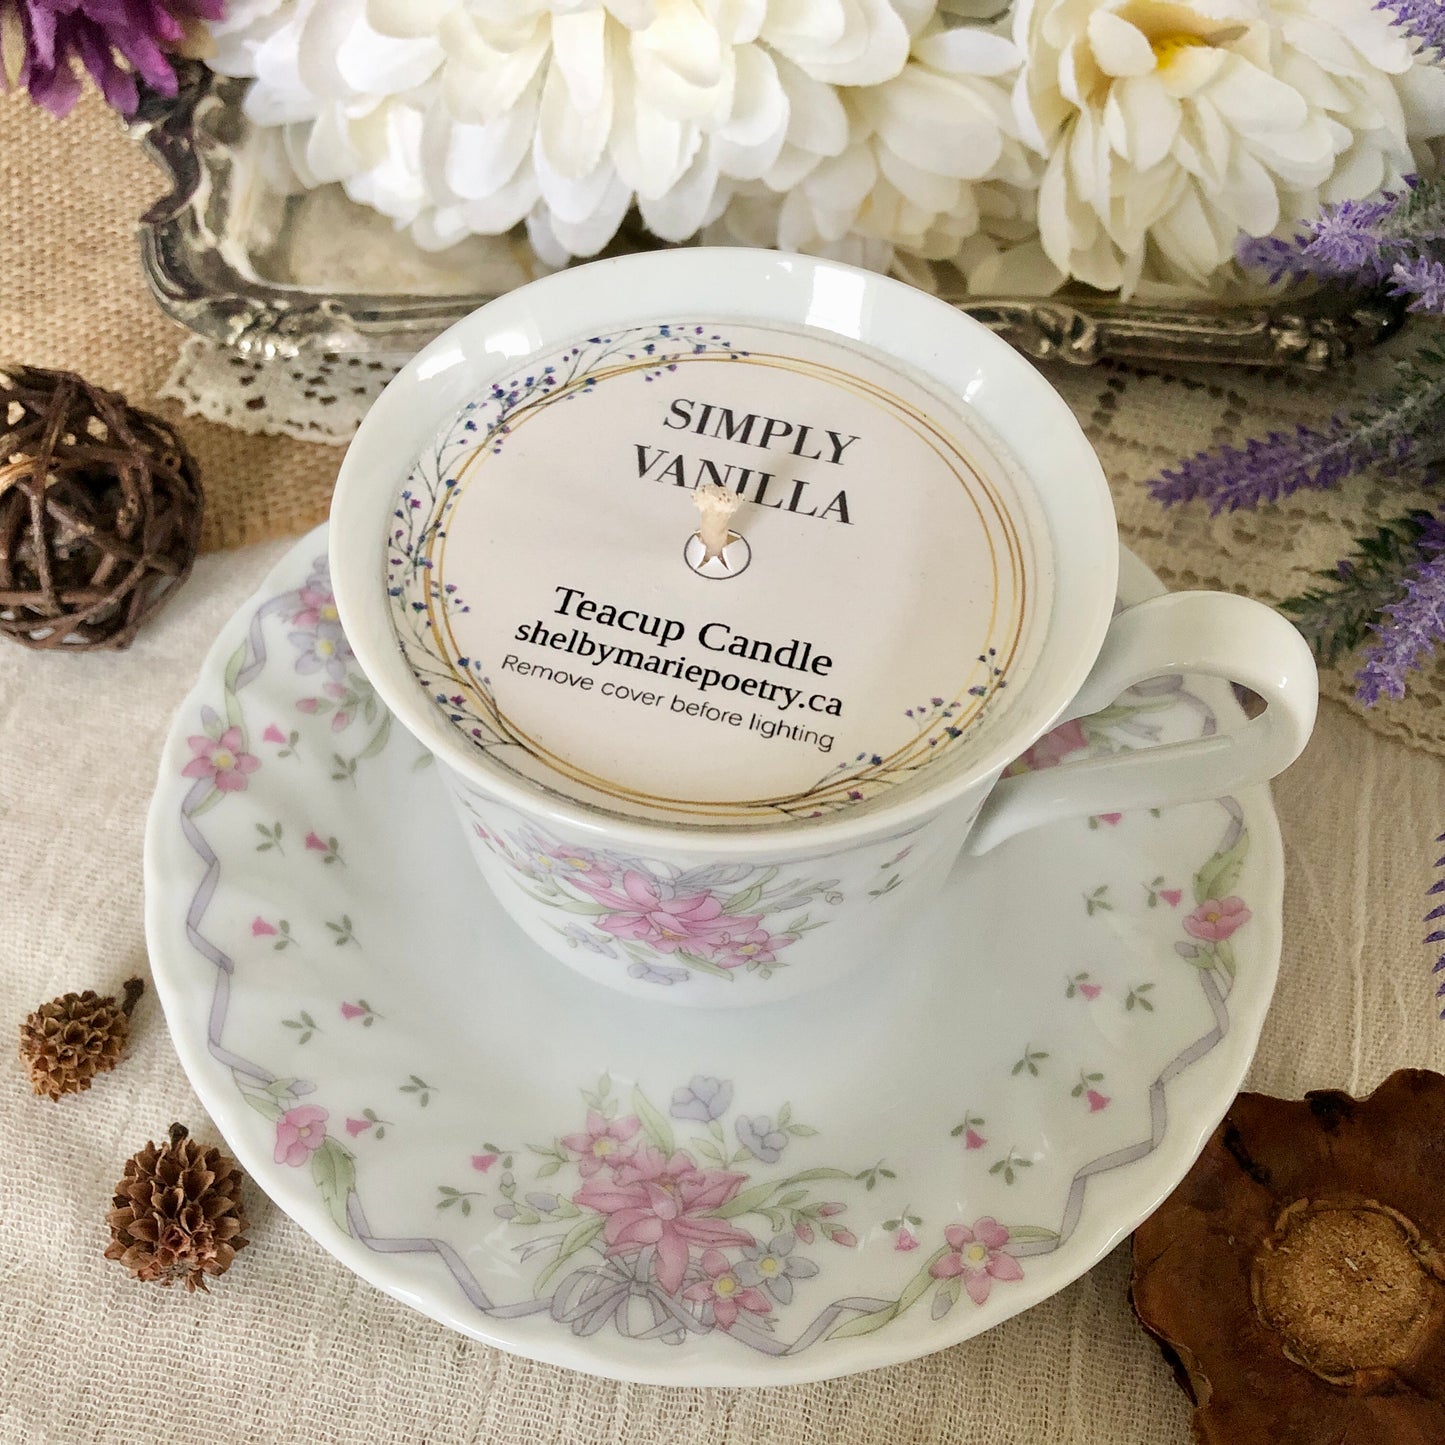 Teacup Candle - Simply Vanilla